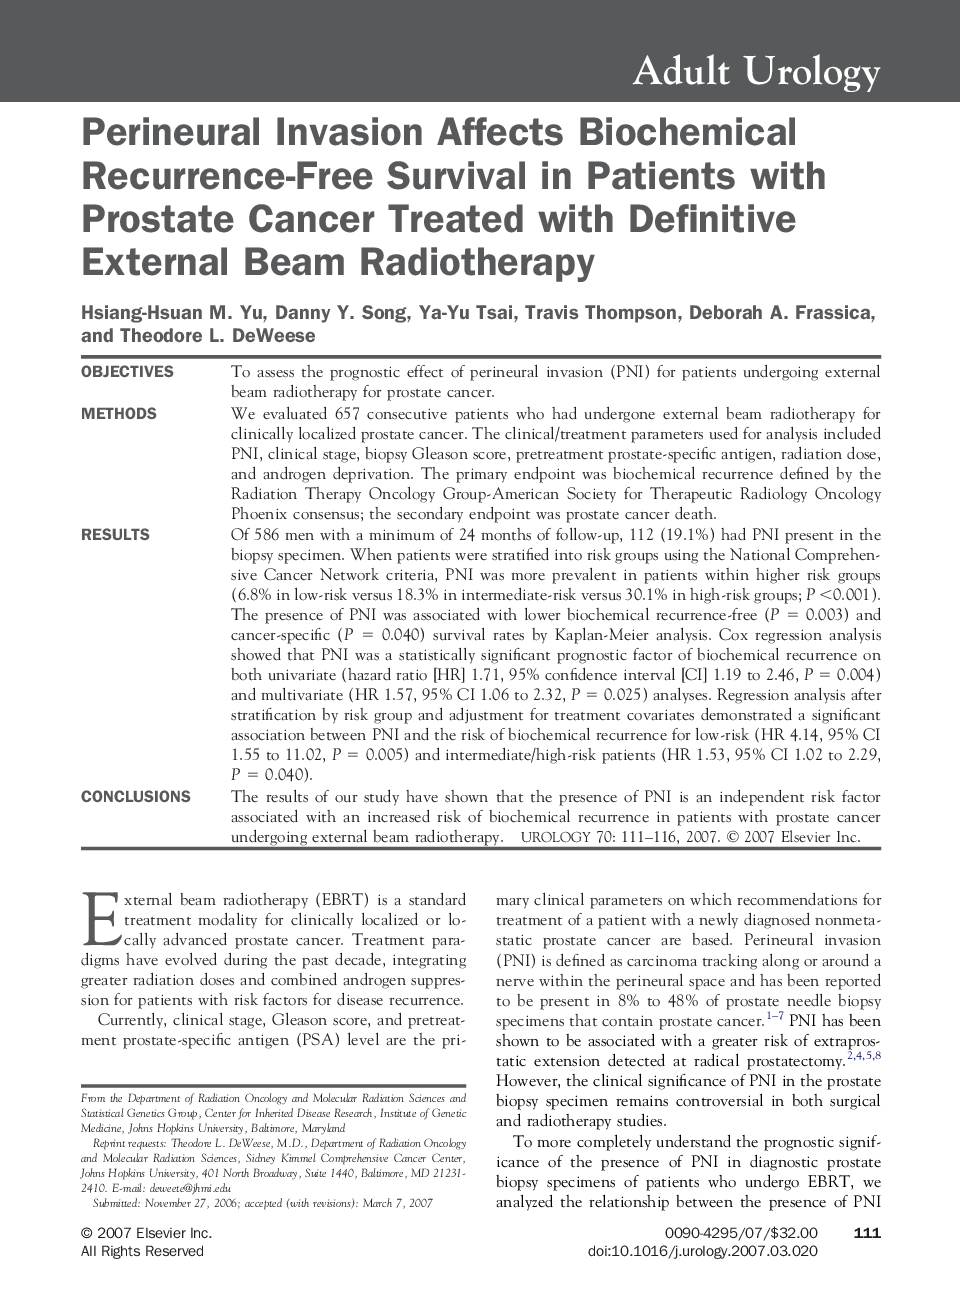 Perineural Invasion Affects Biochemical Recurrence-Free Survival in Patients with Prostate Cancer Treated with Definitive External Beam Radiotherapy